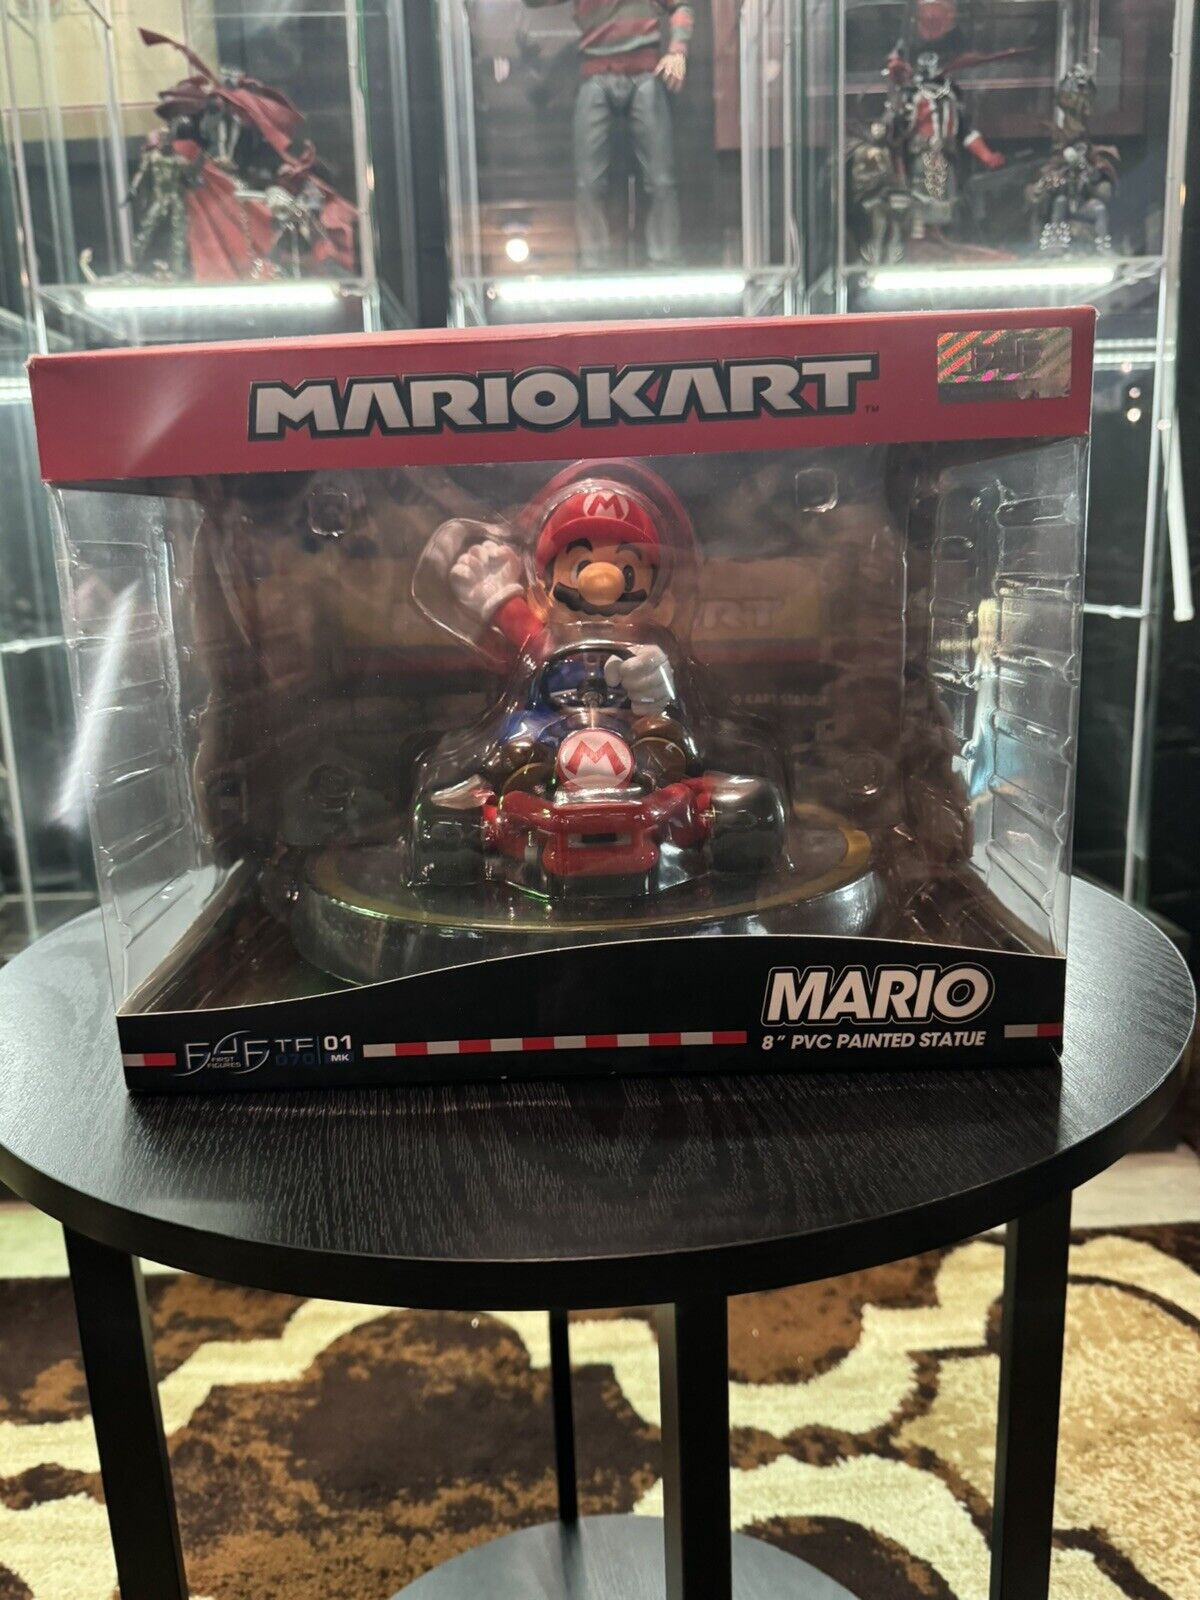 NEW OPEN BOX Mario Kart: Mario Standard Edition PVC Figure by First4figures